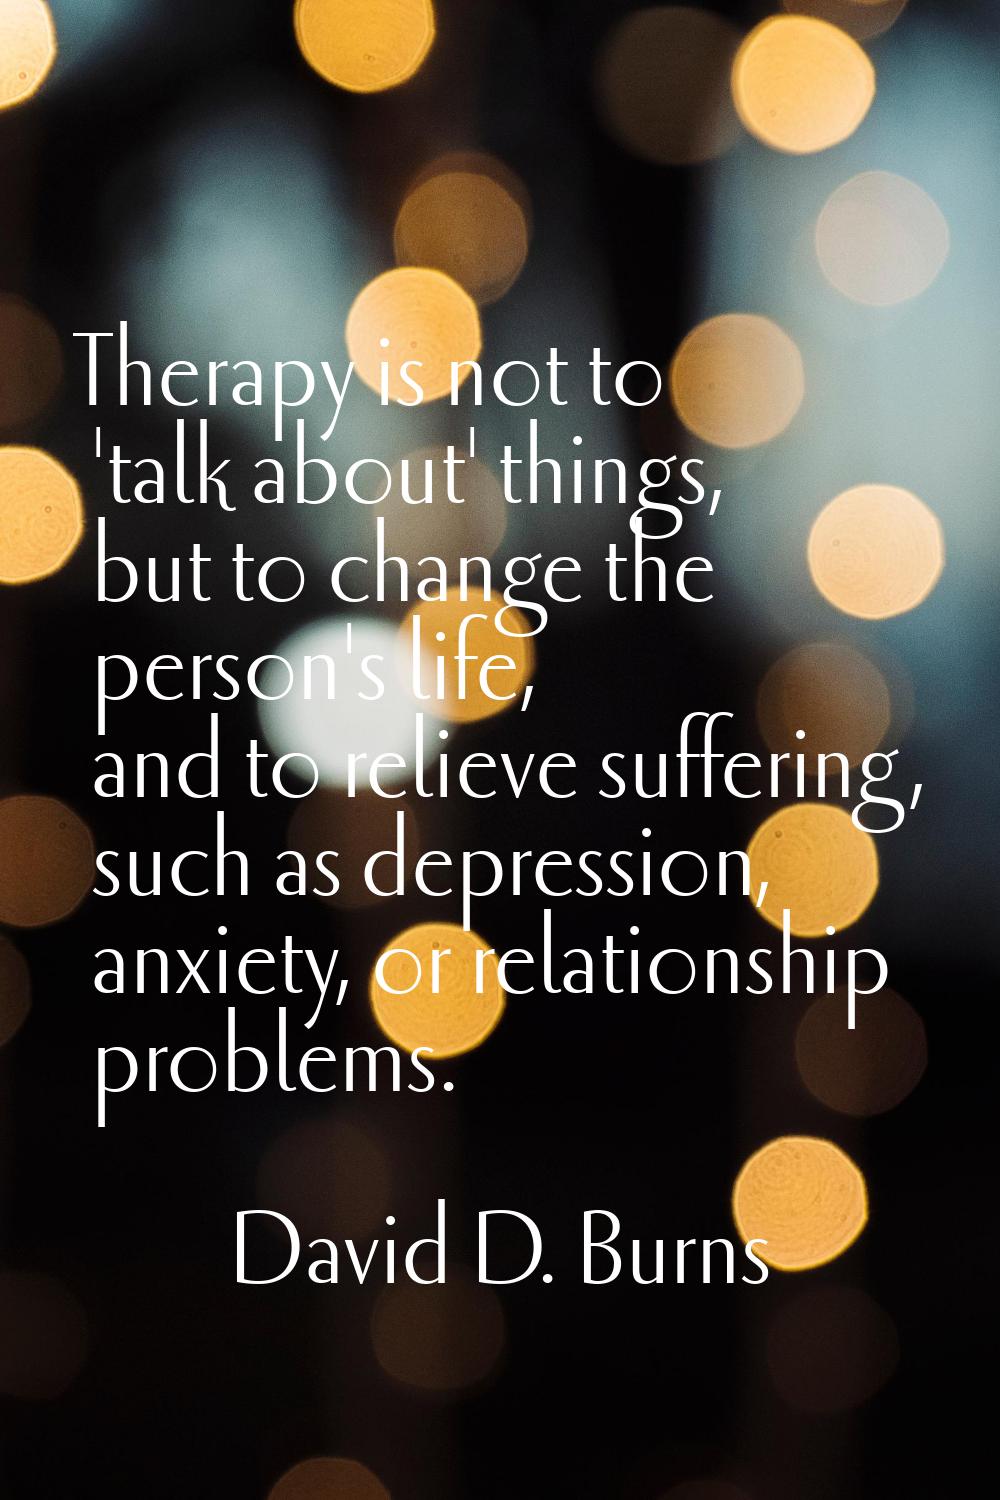 Therapy is not to 'talk about' things, but to change the person's life, and to relieve suffering, s